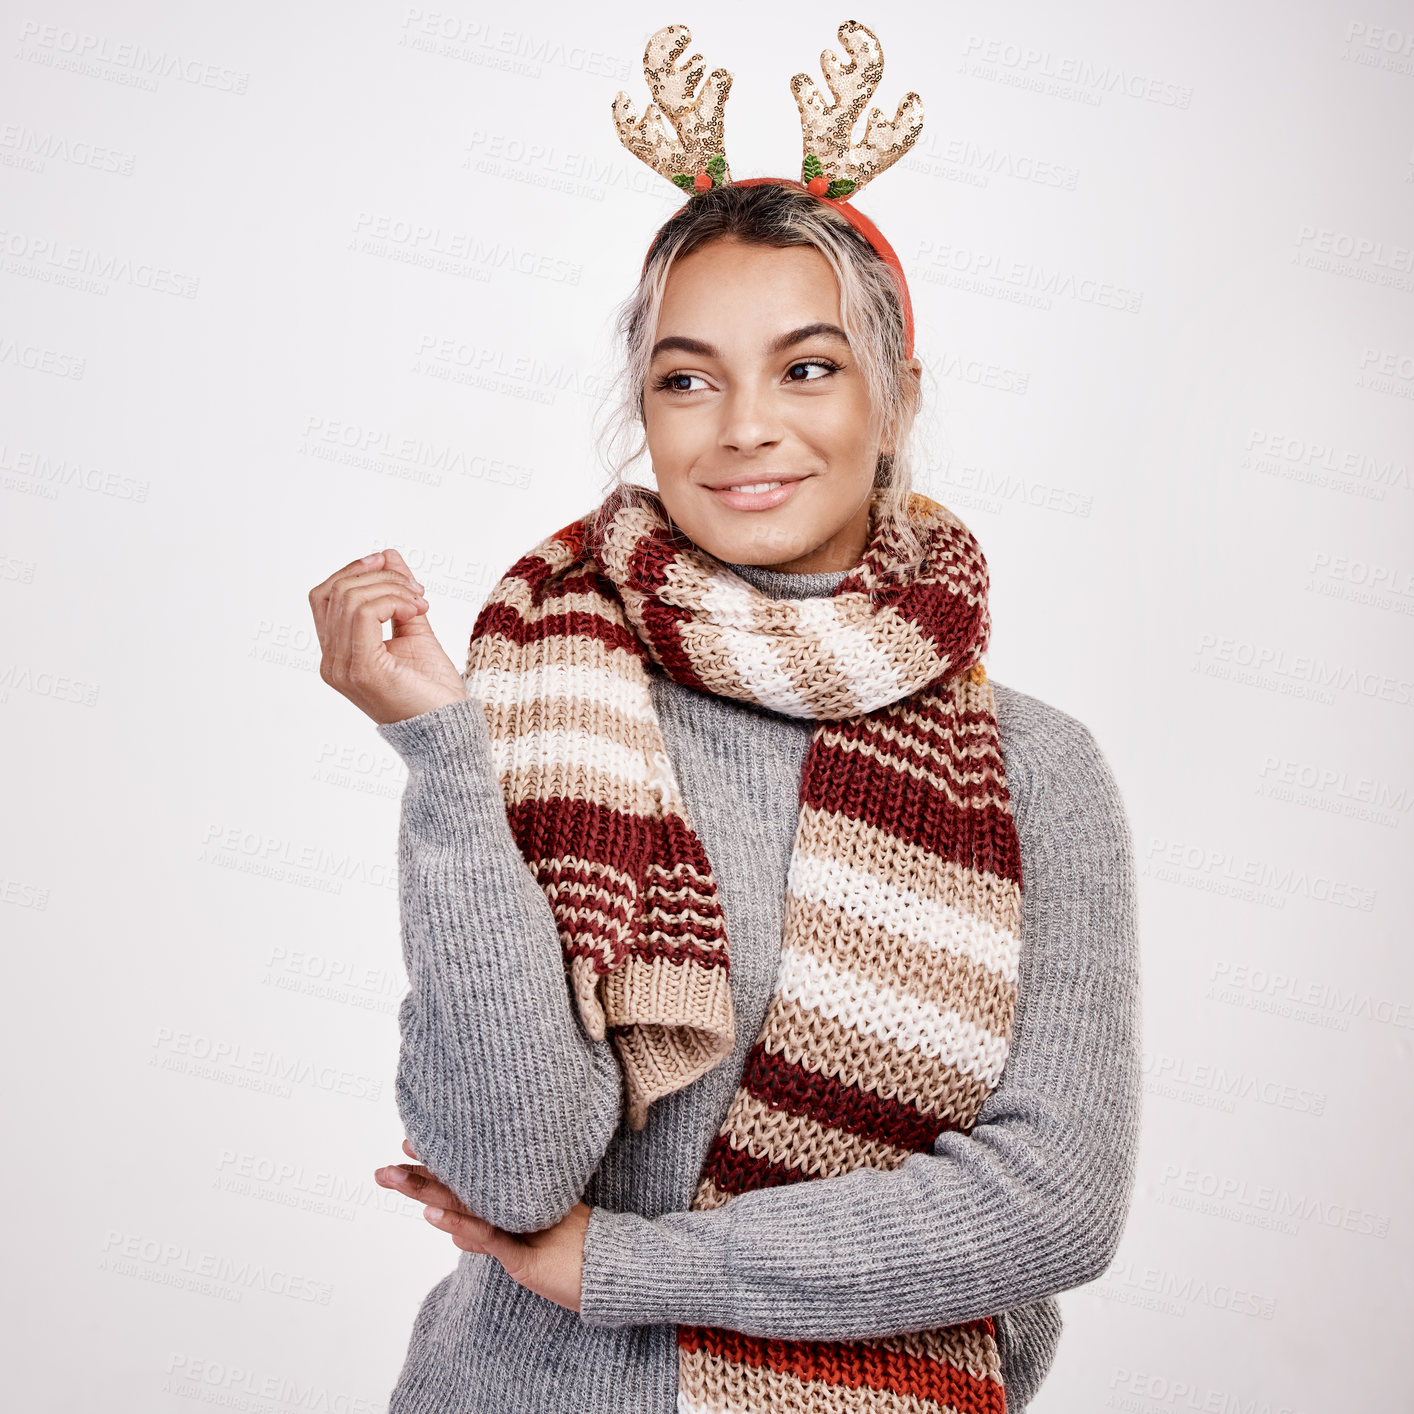 Buy stock photo Studio shot of an attractive young woman looking thoughtful while dressed in Christmas-themed attire